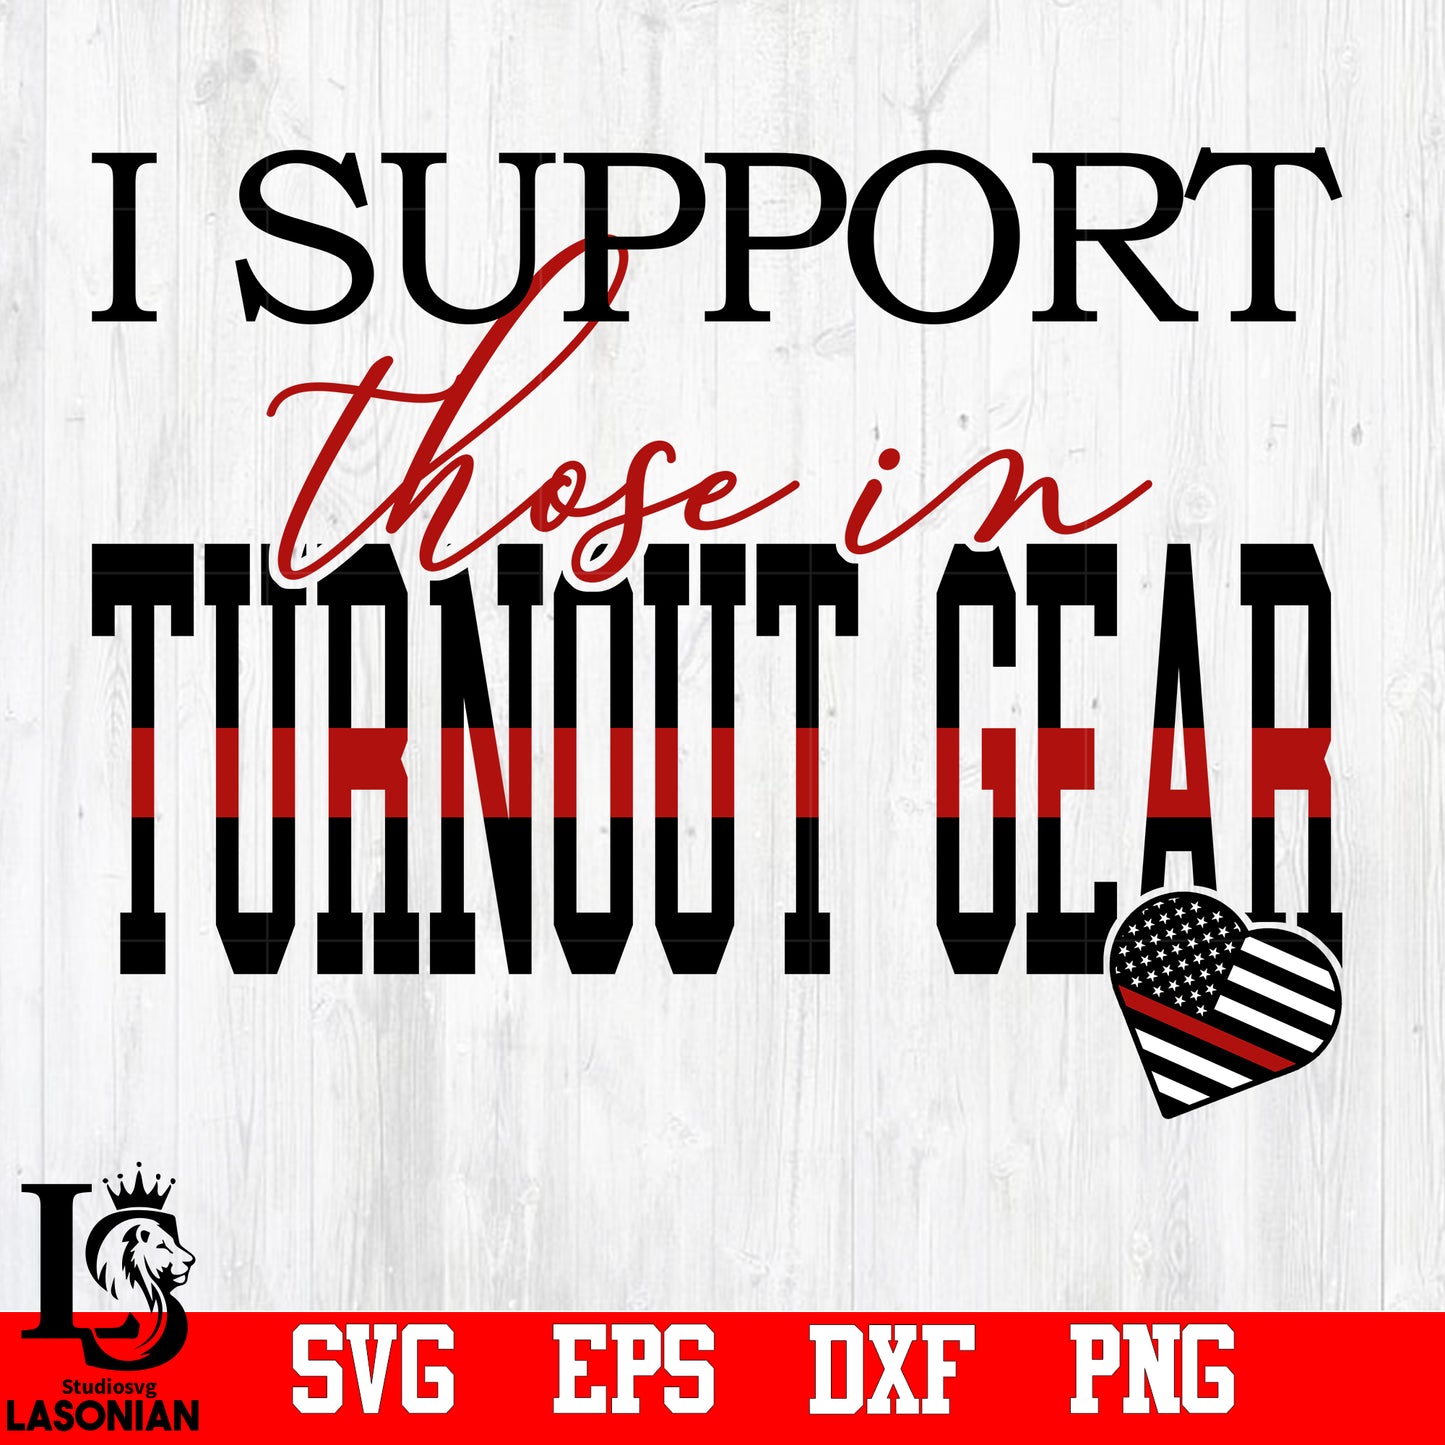 I Support Those In Turnout Gear svg,eps,dxf,png file